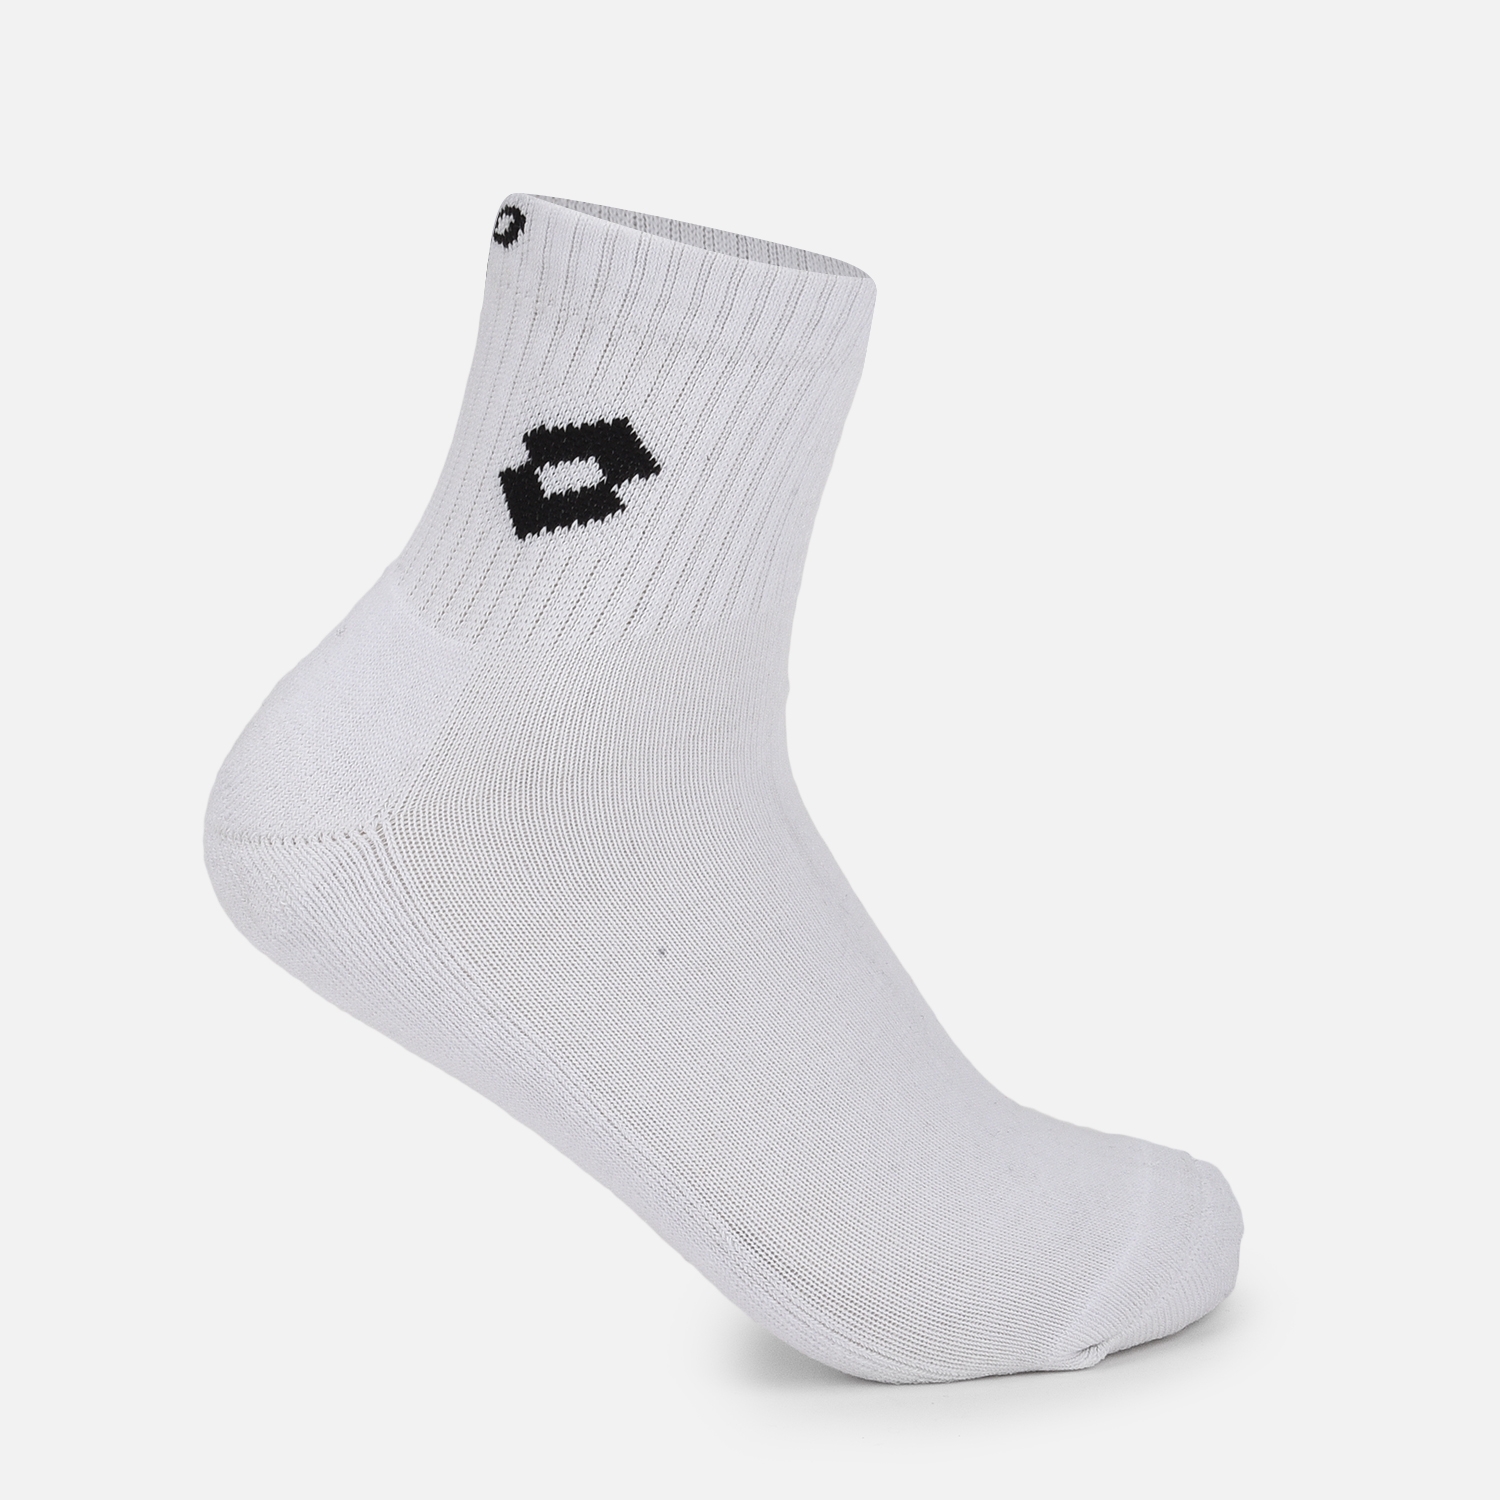 Lotto | LOTTO ANKLE SOCKS BLACK/ GREY/ WHITE (PACK OF 3)